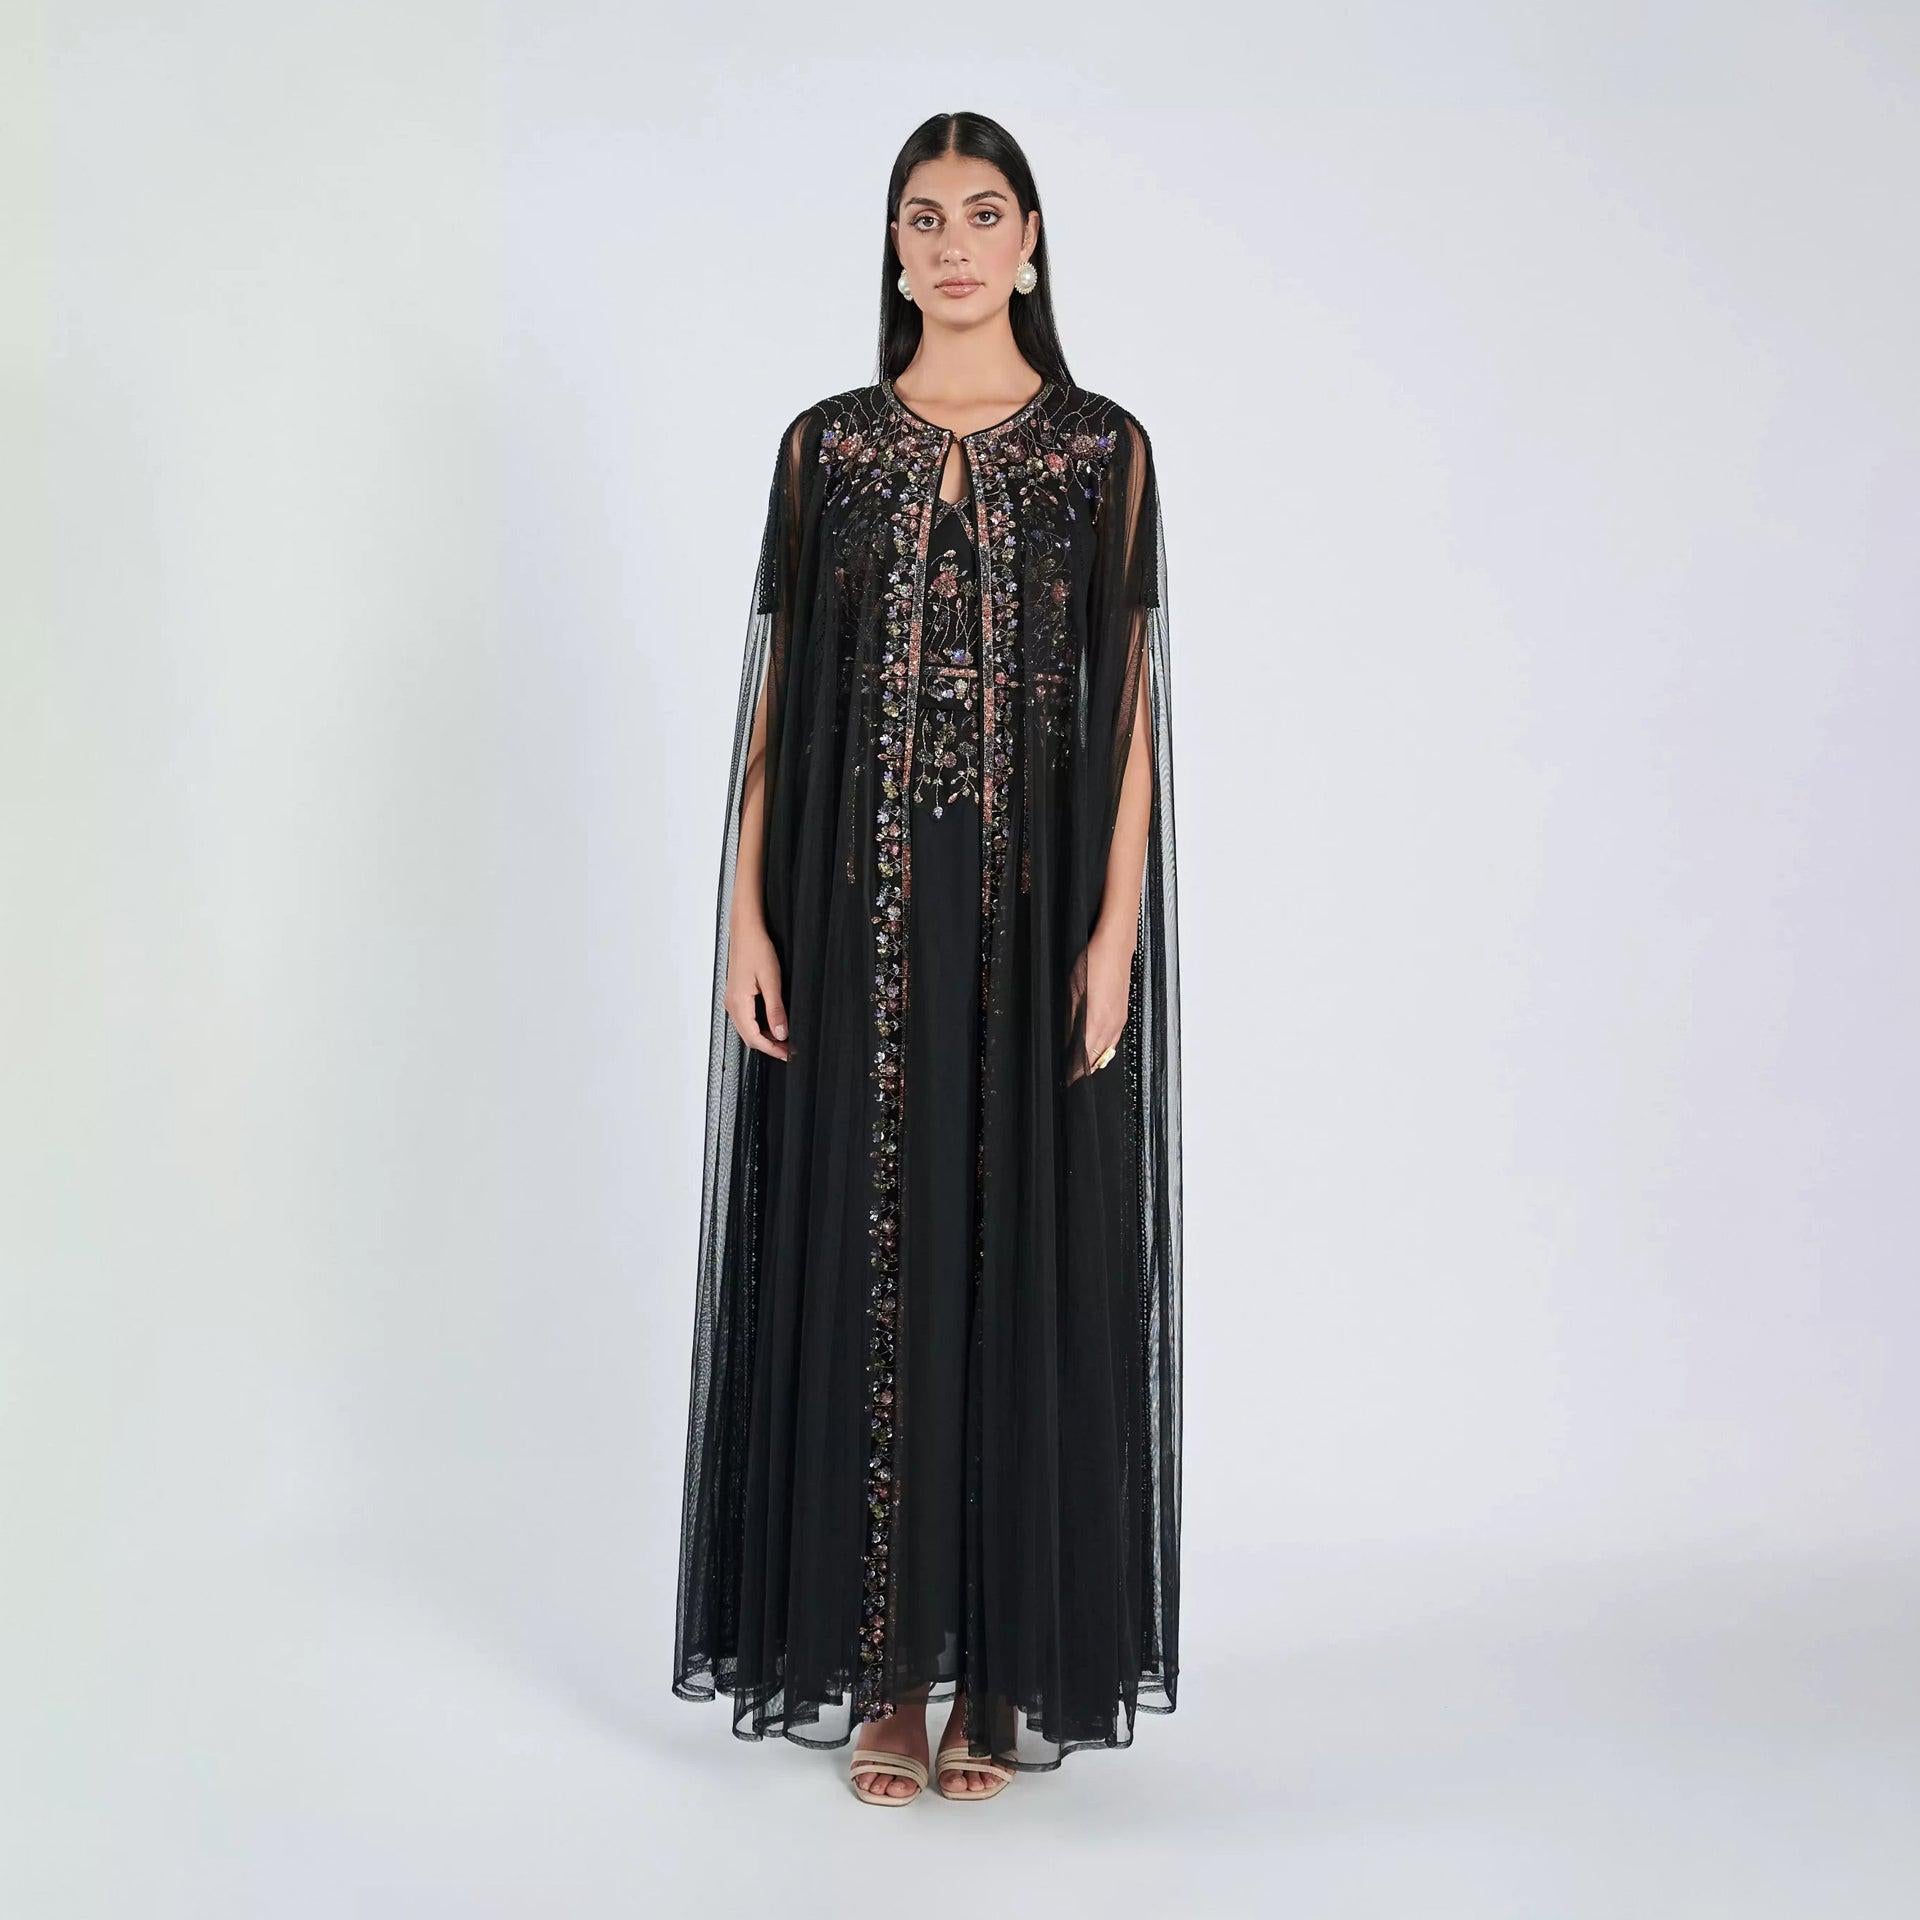 Black Nouran Dress From Shalky